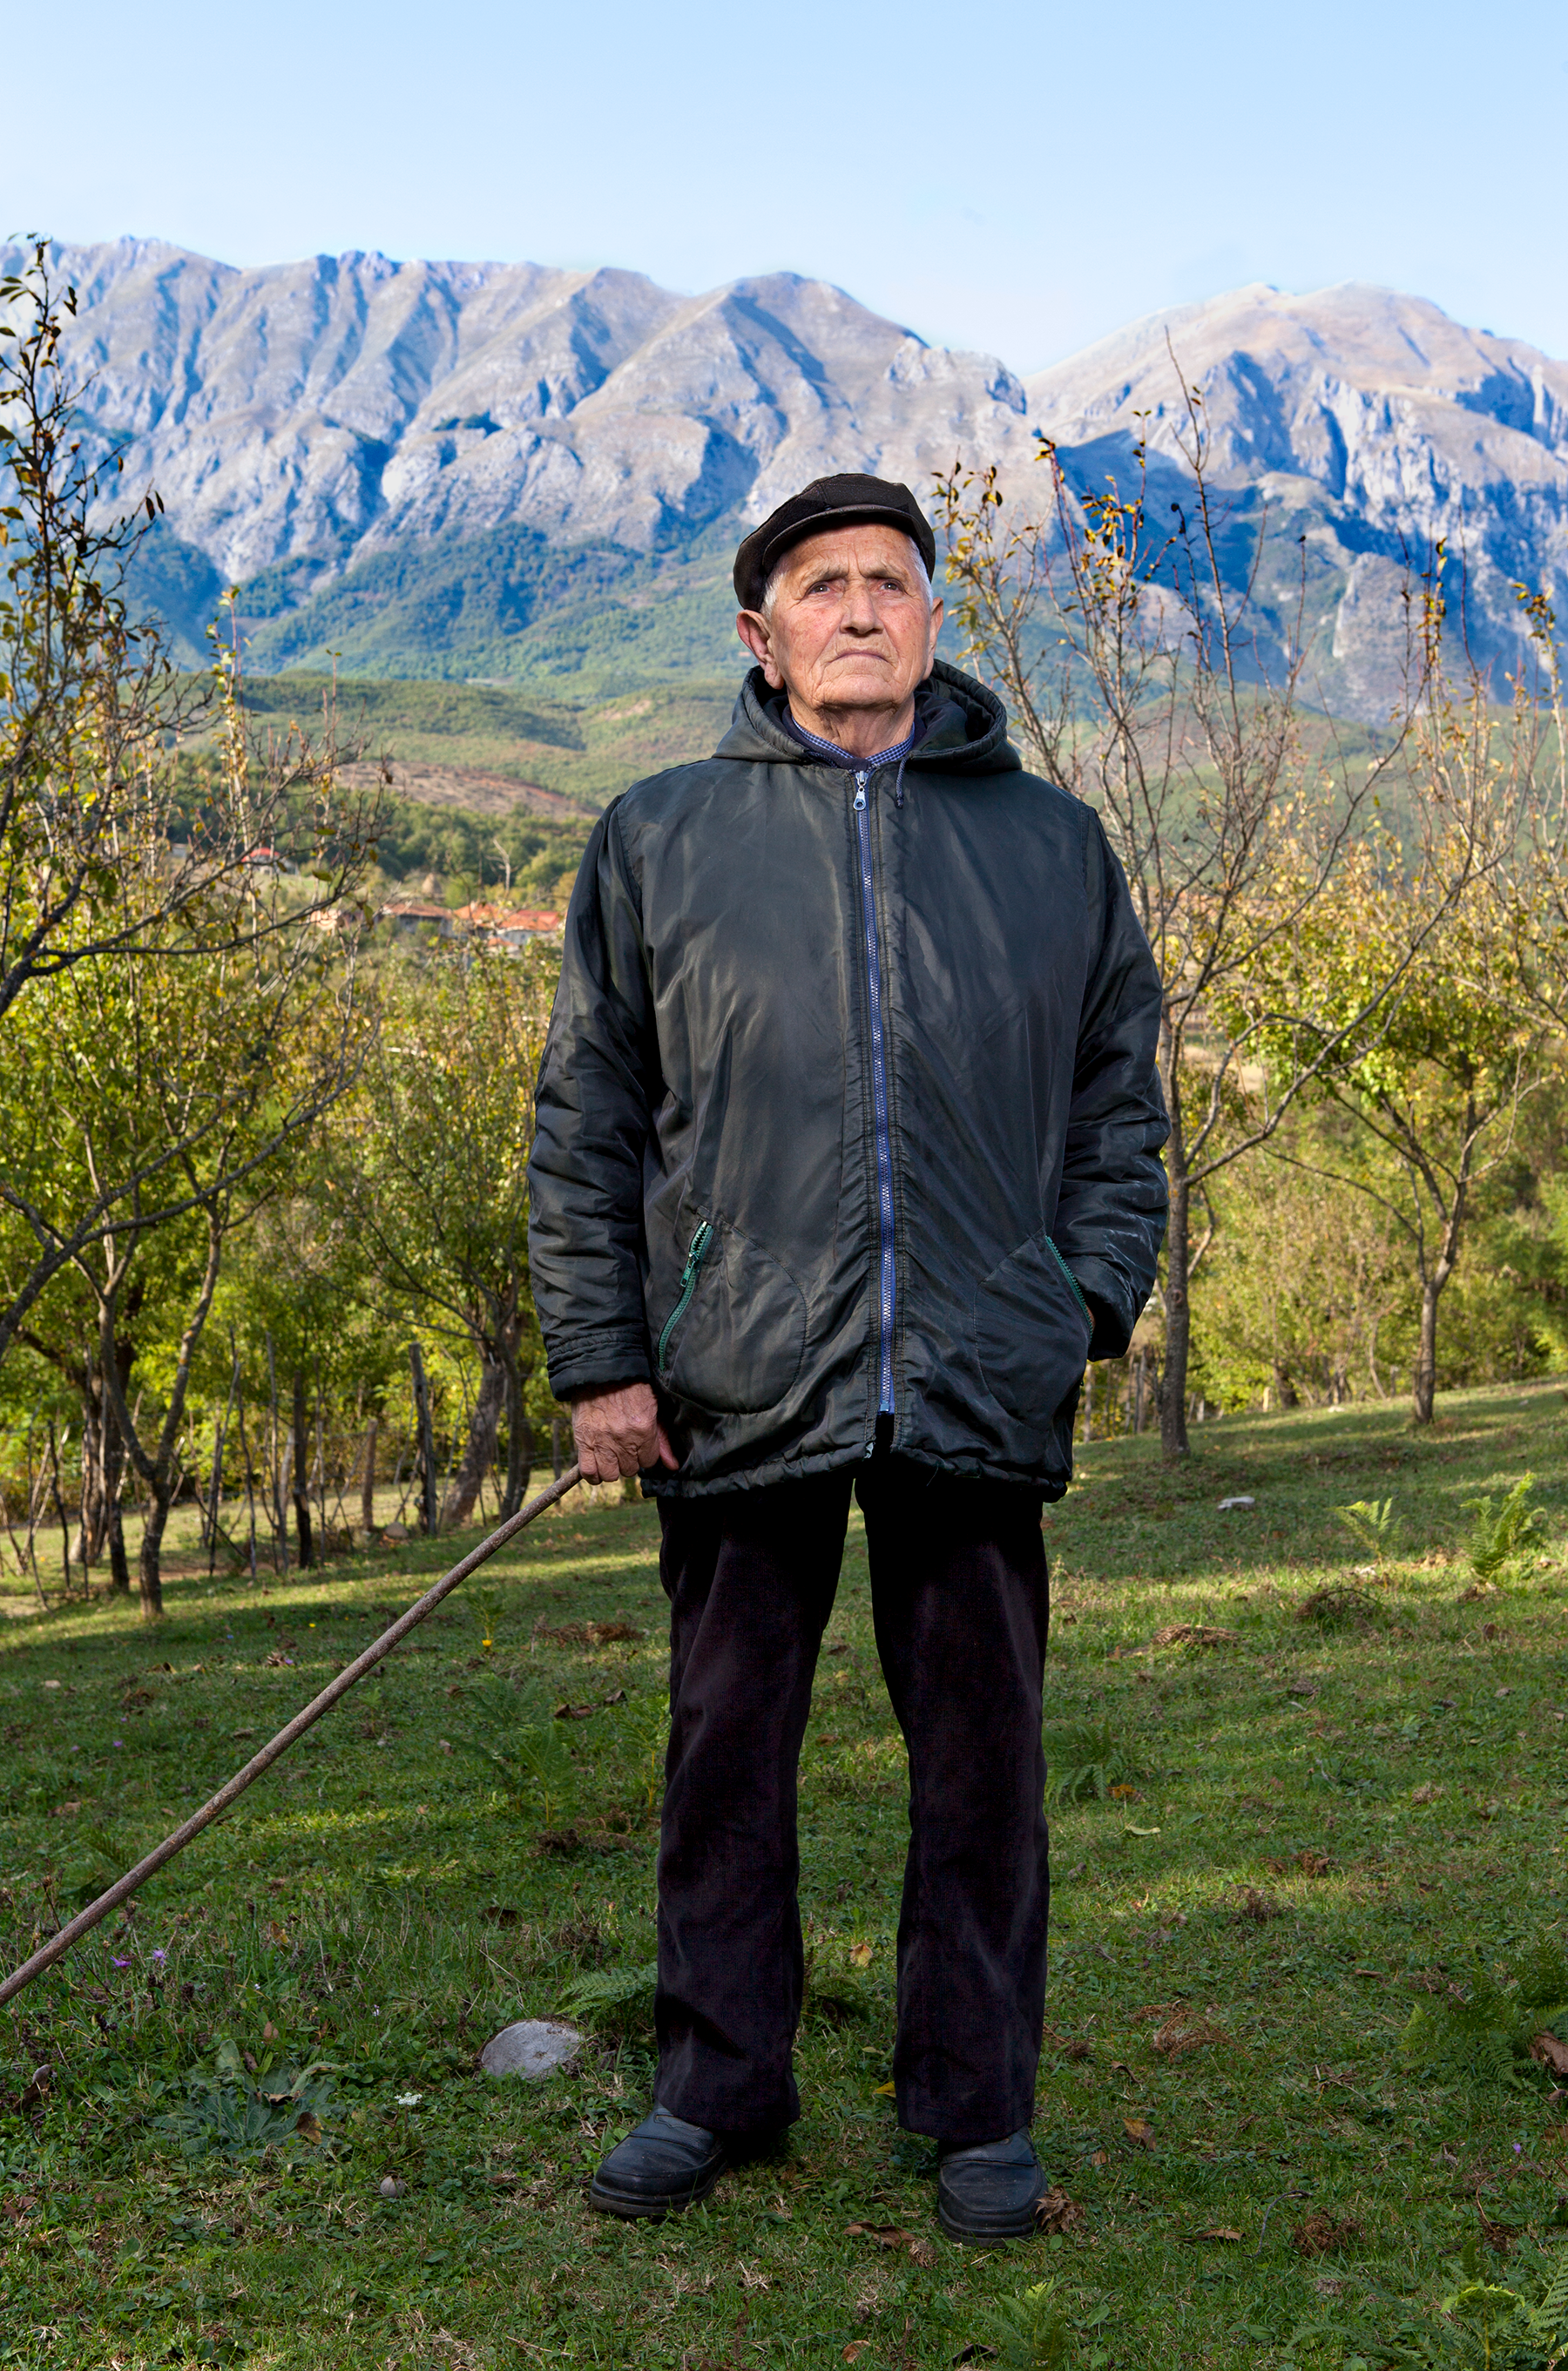 A person in a large black raincoat and black slacks looks up in front of an orchard.